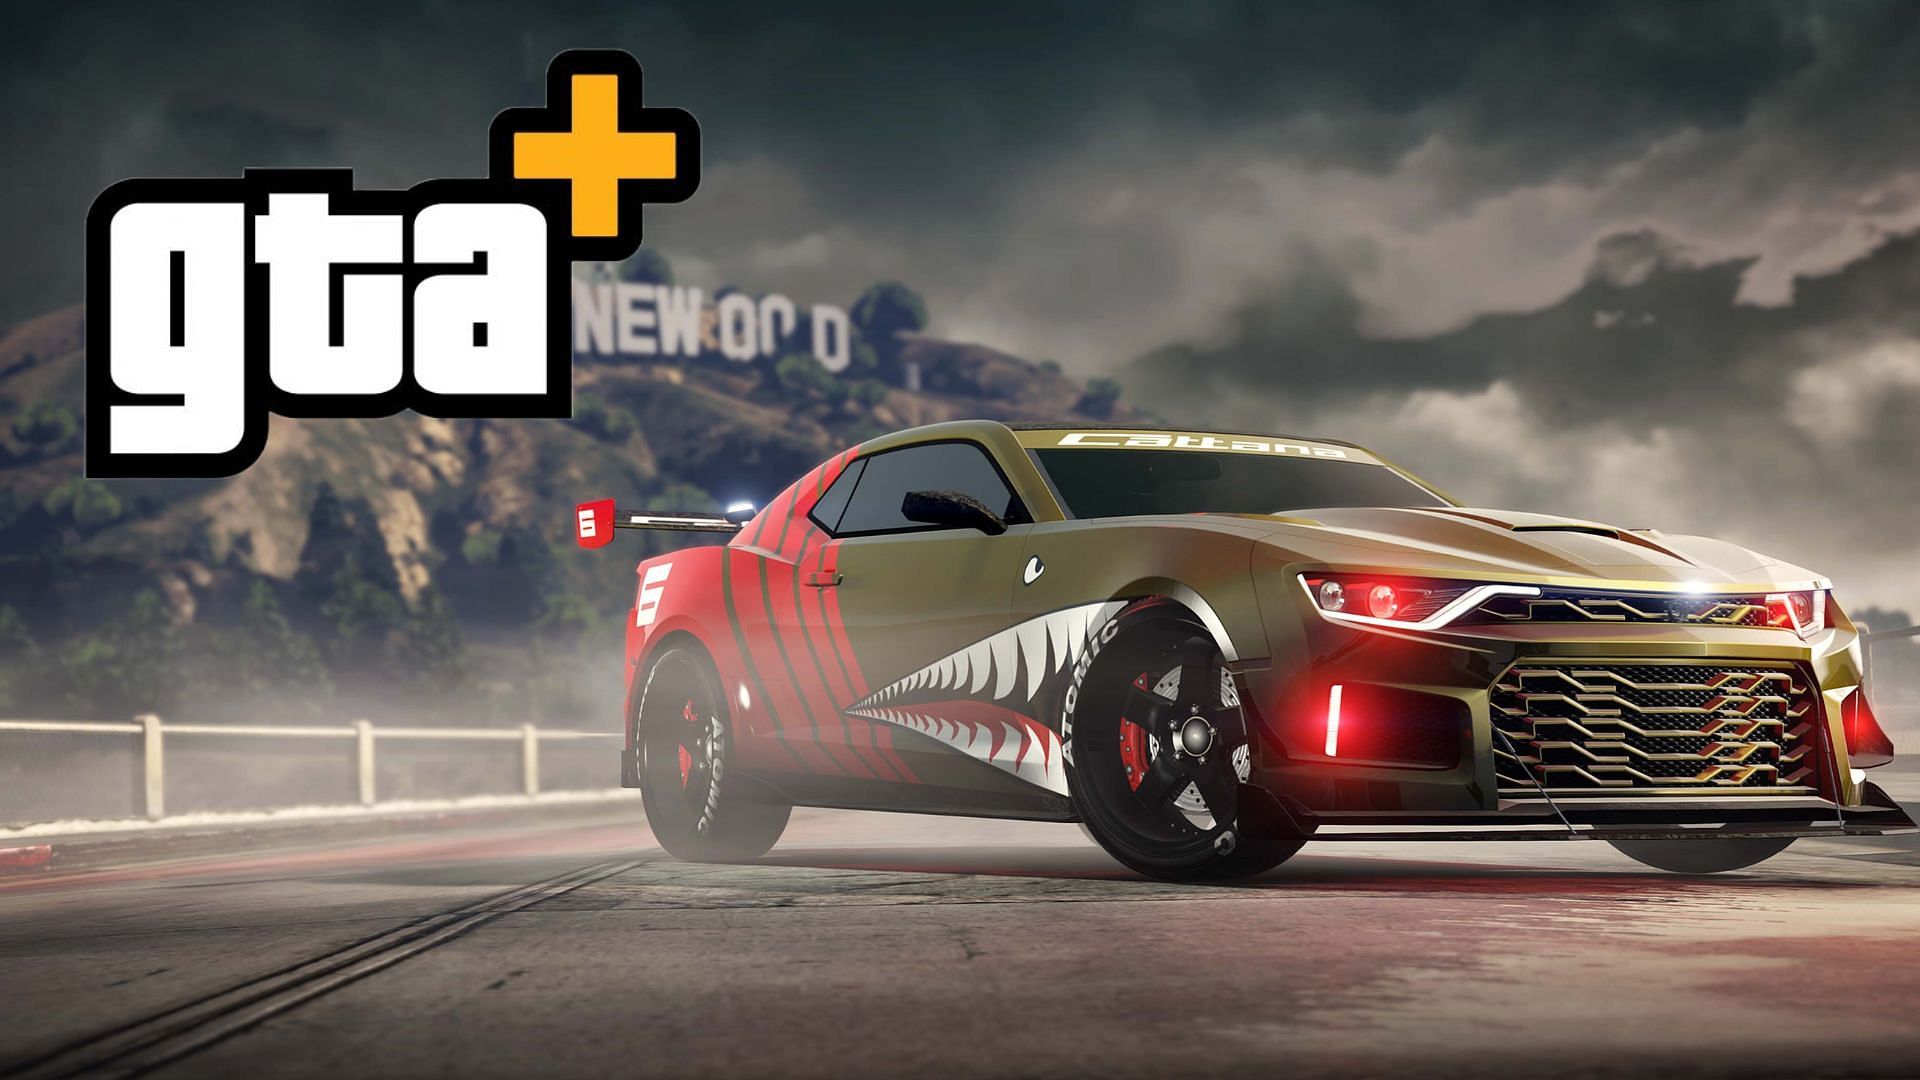 Is a GTA+ subscription worth it just for the cars?